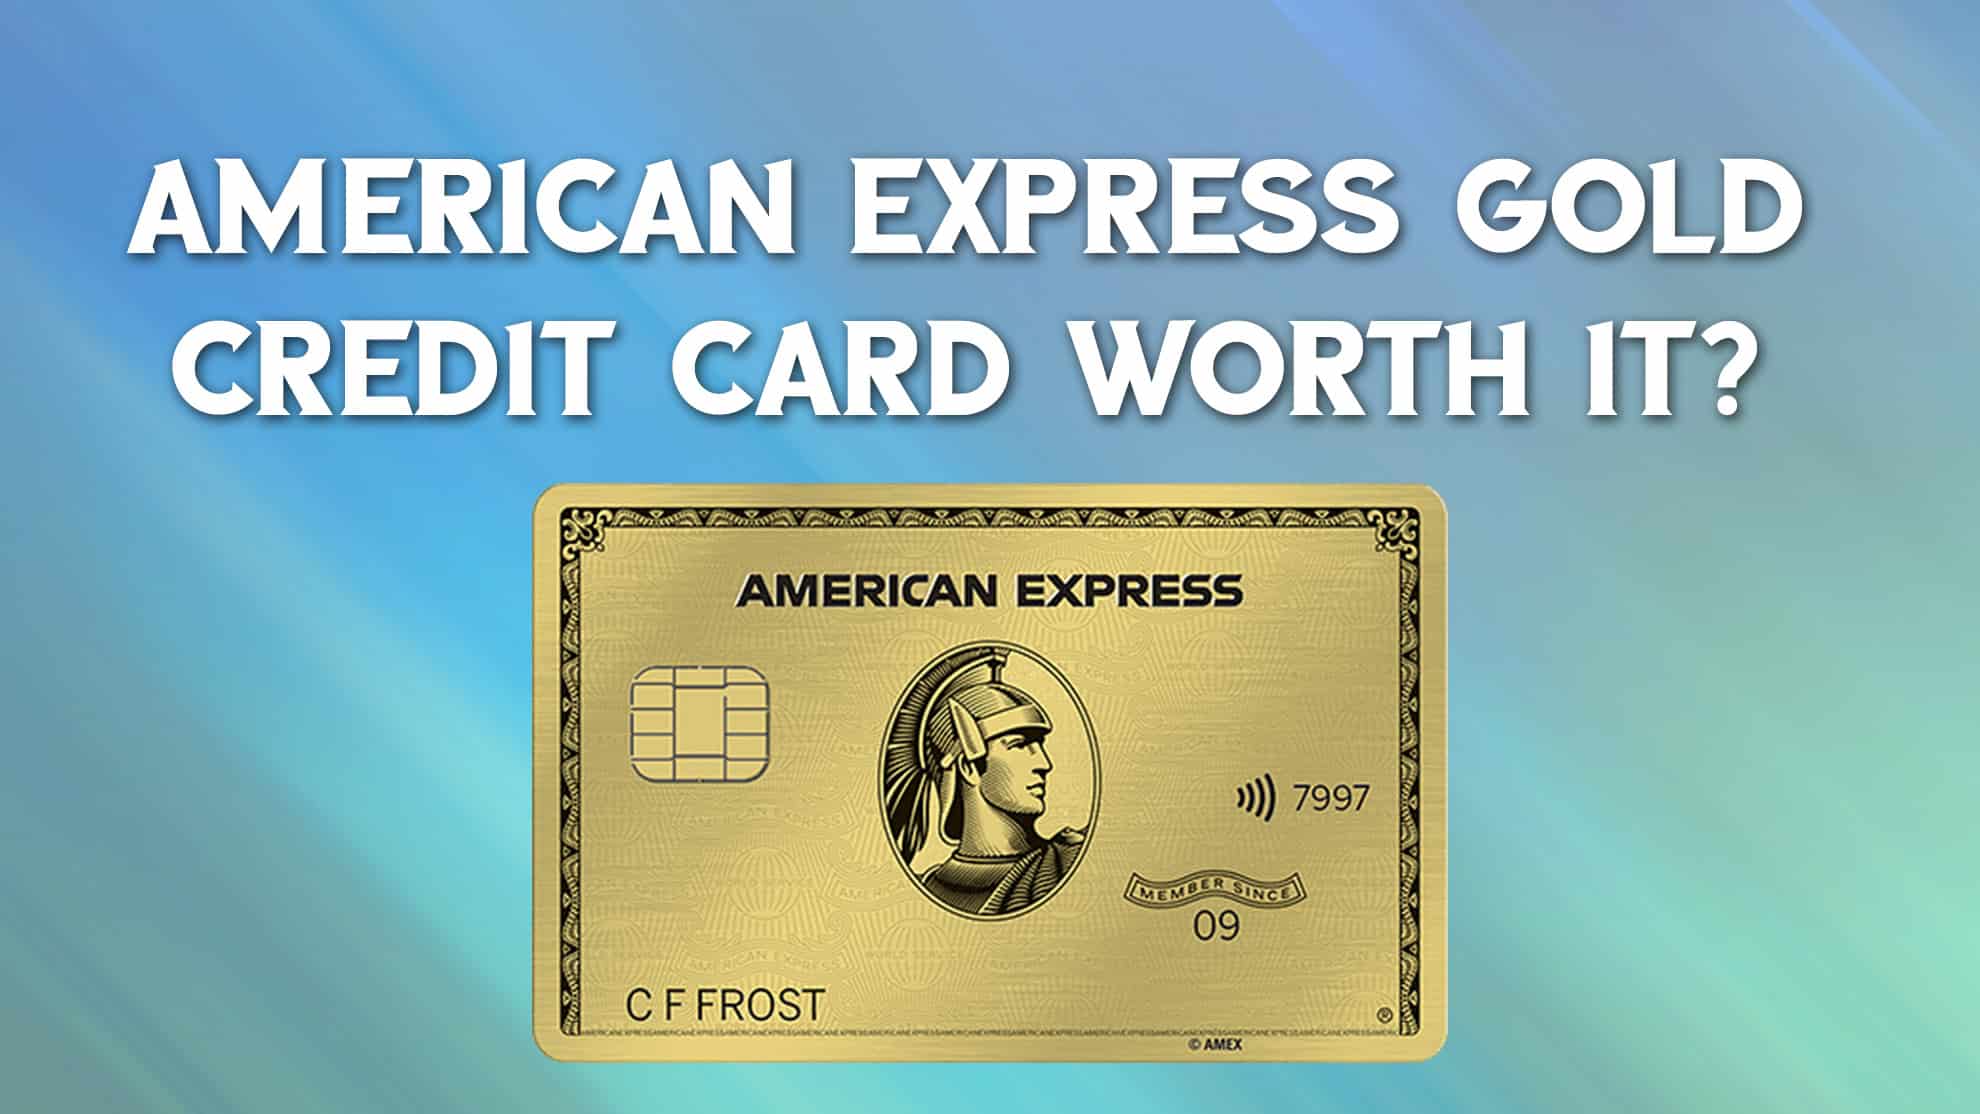 American Express Gold Card Review (AMEX Credit Card Worth It?)